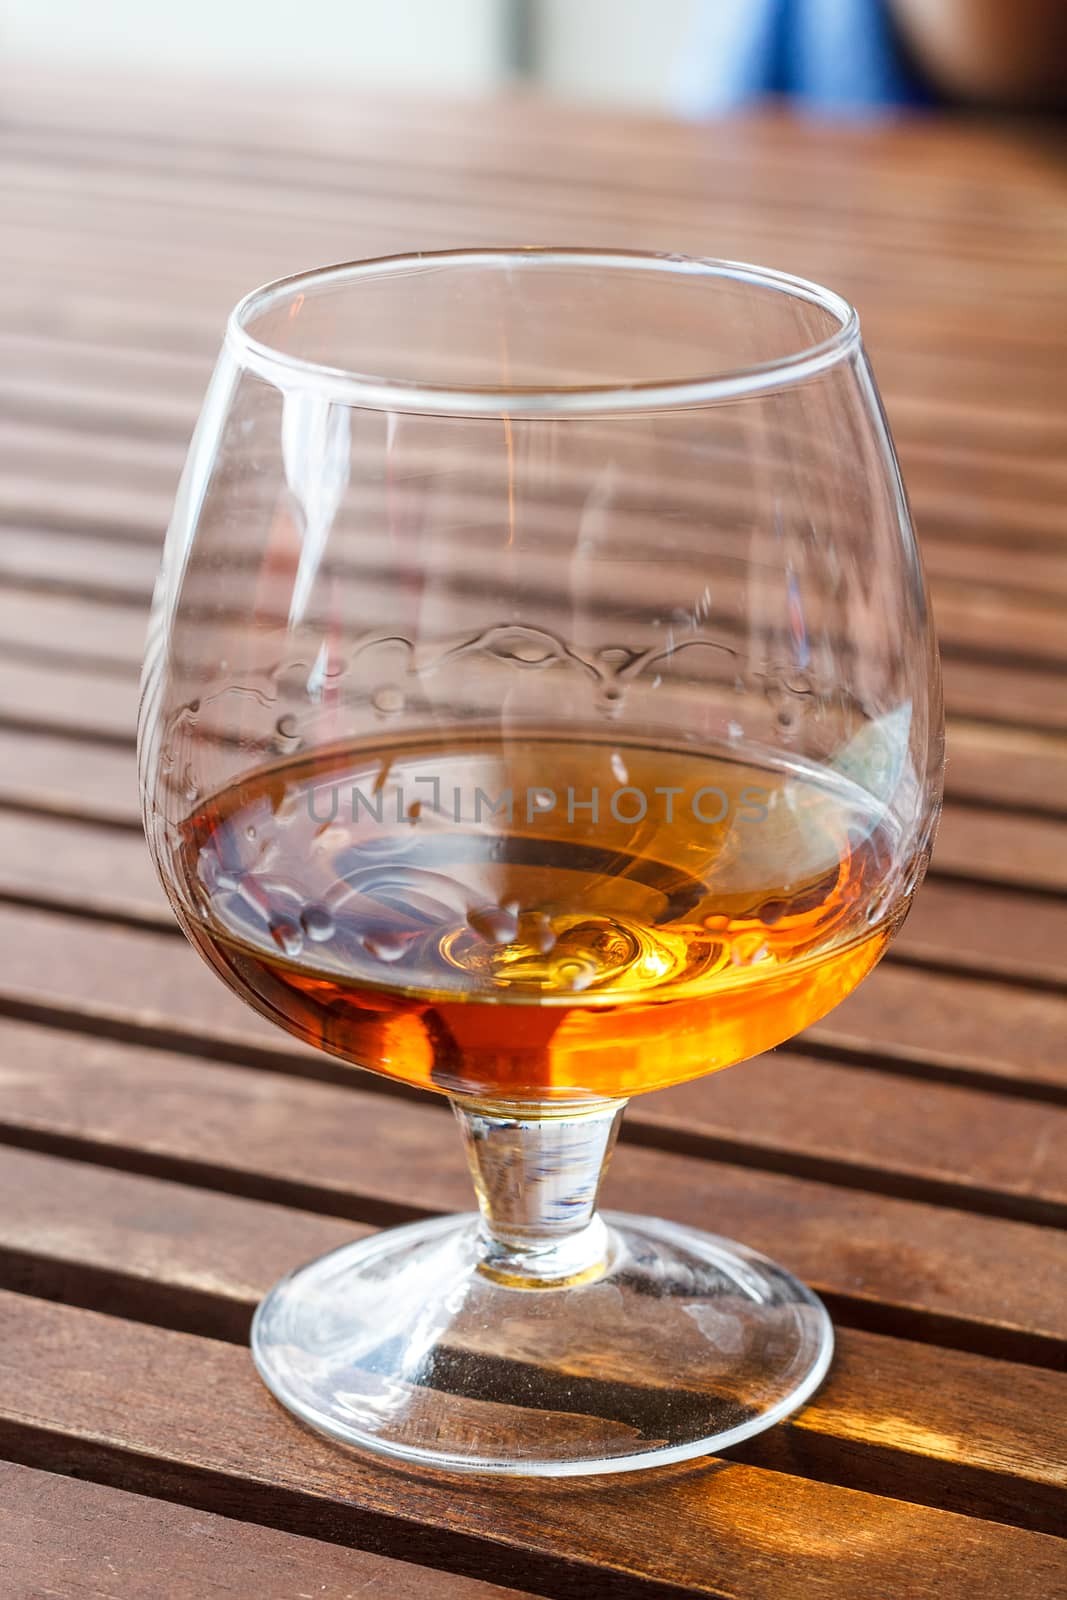 Glass of cognac standing on a wooden table in sunlight.
